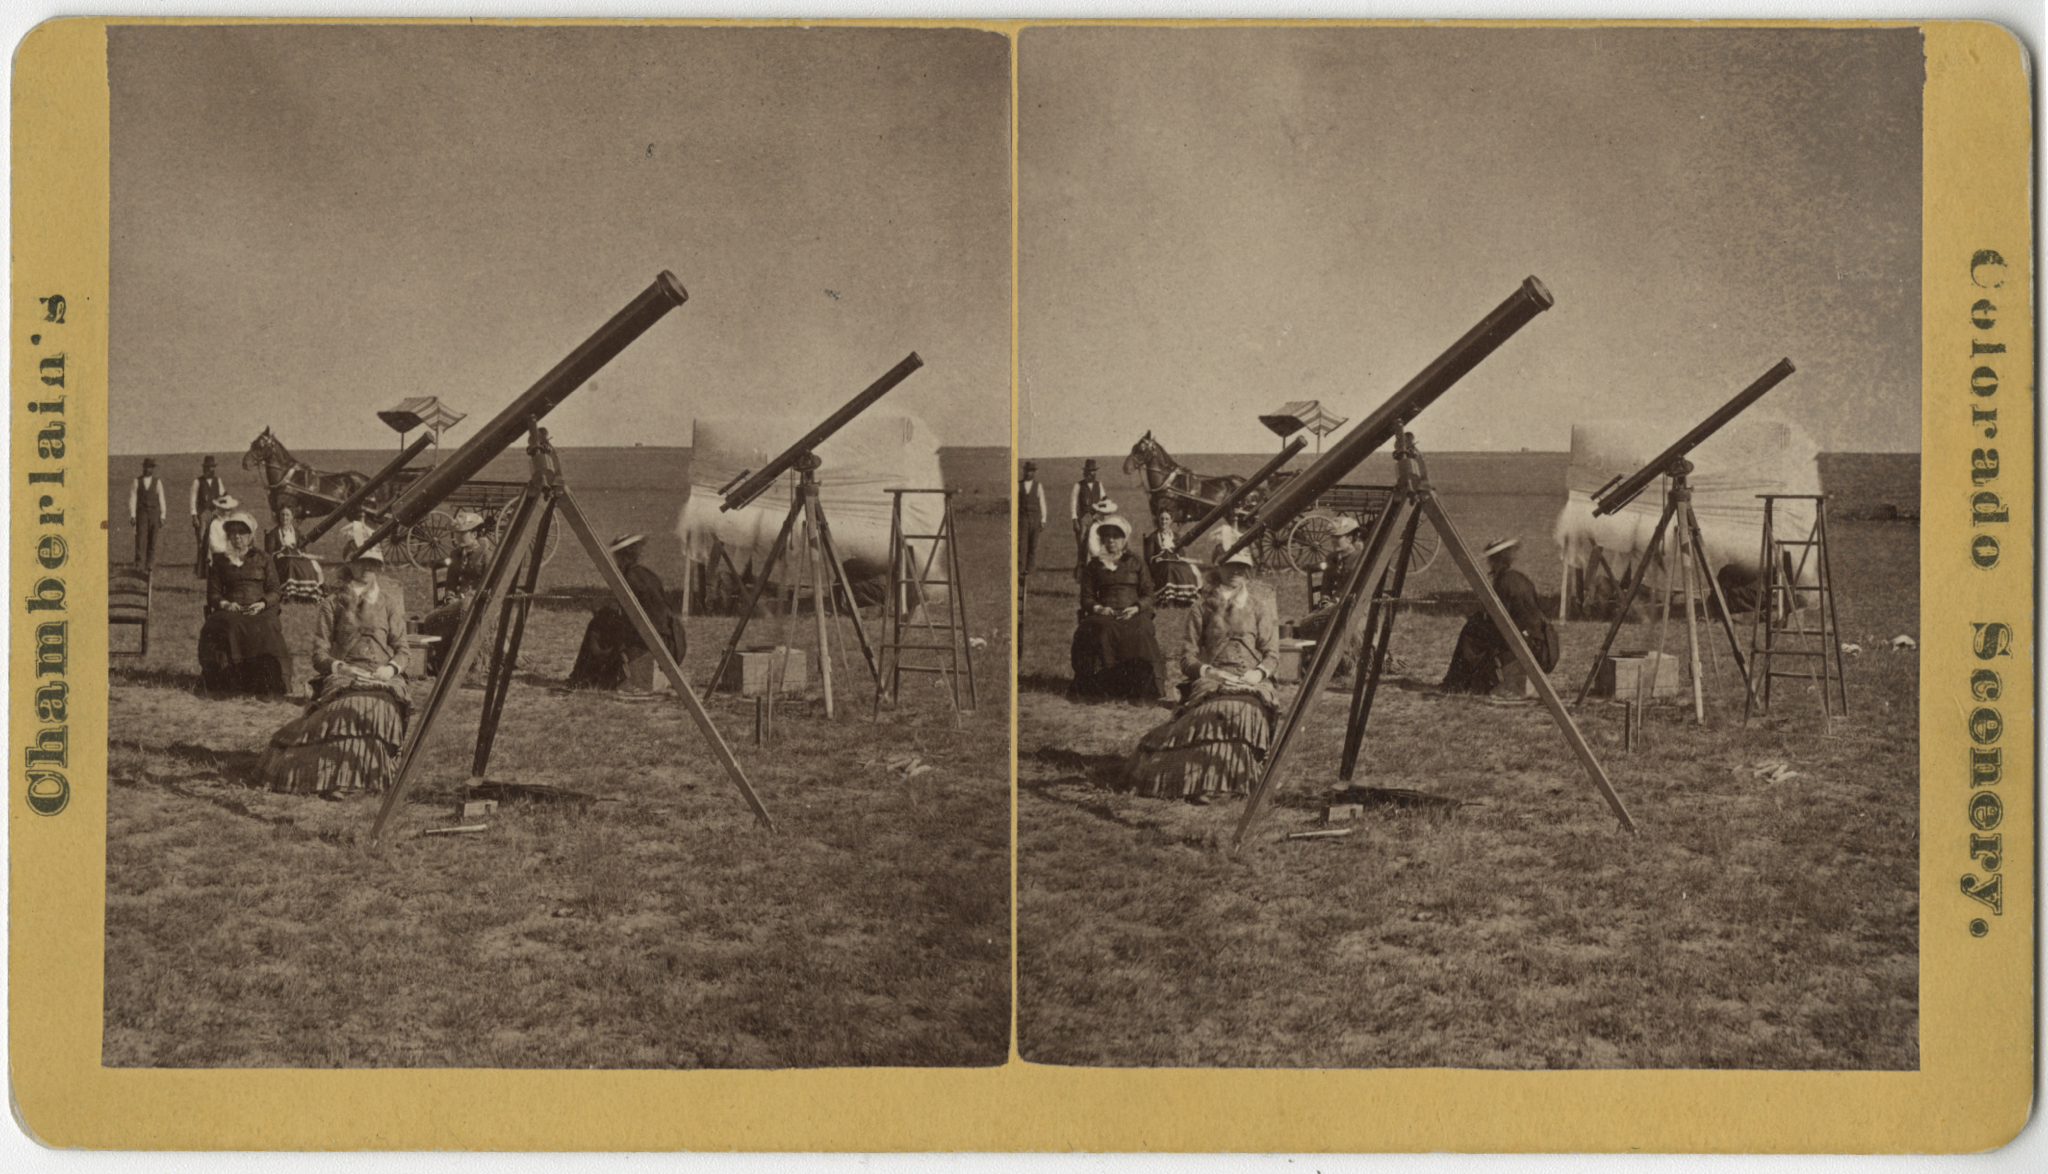 Vassar College astronomer Maria Mitchell and her 1878 eclipse viewing party in Denver. (Archives and Special Collections, Vassar College Library)